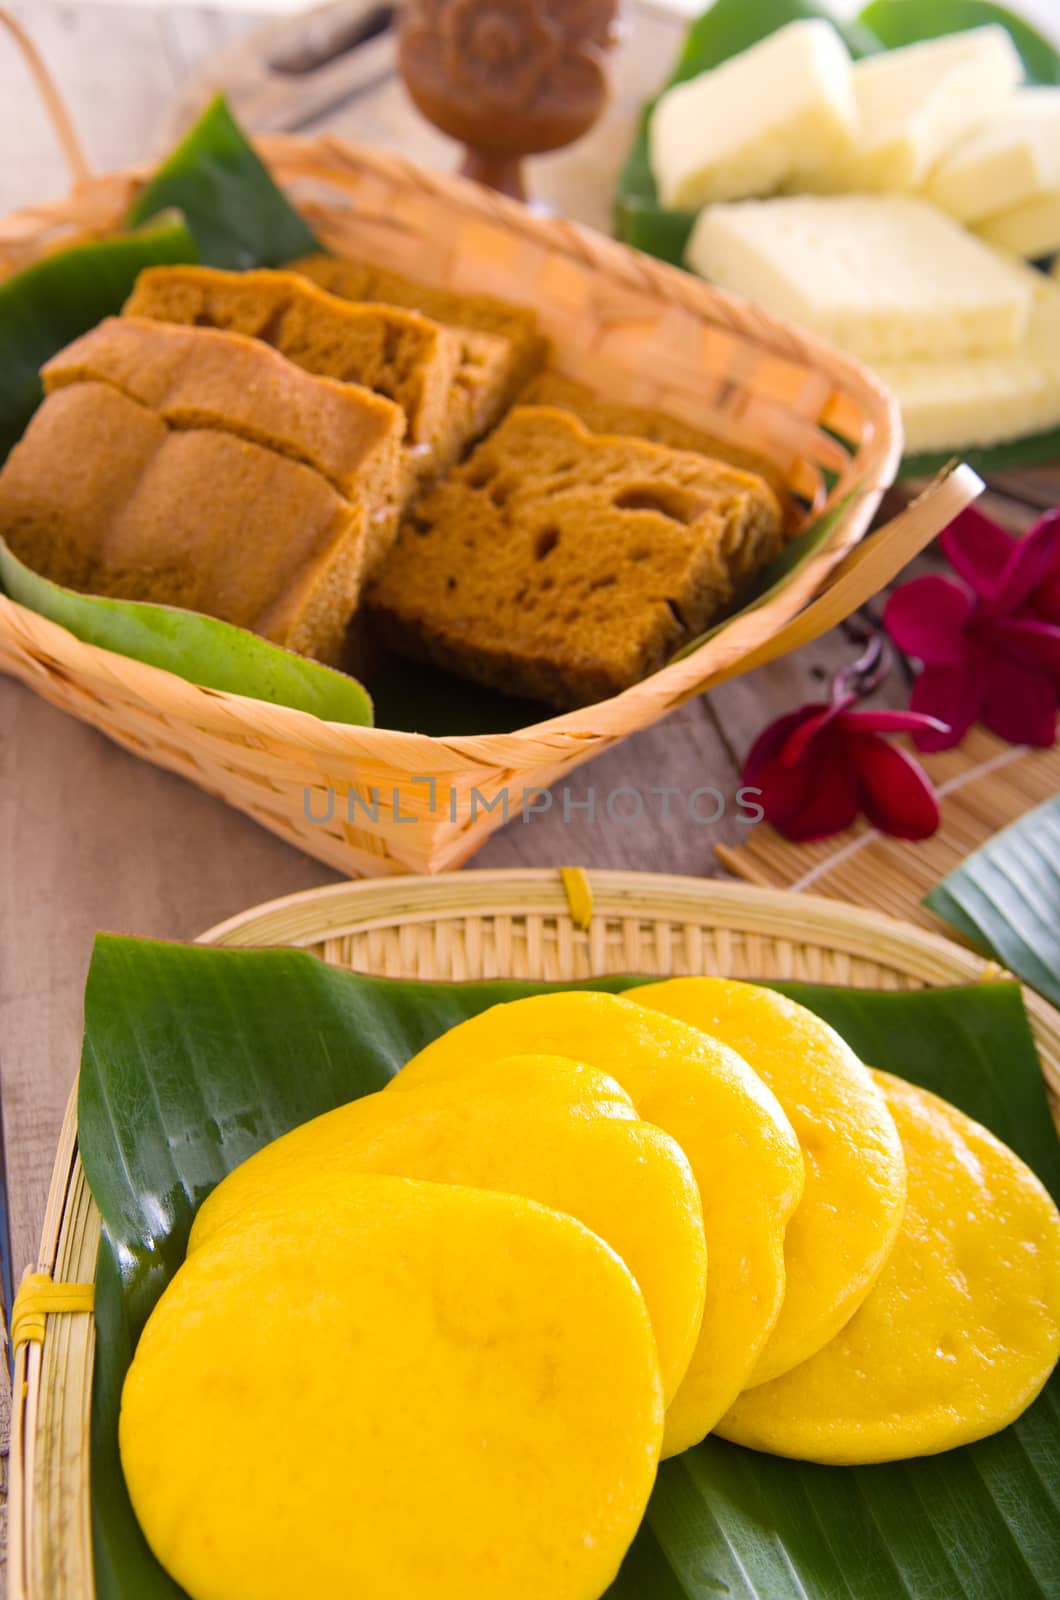 Assorted Tradisional malaysia cakes by yongtick